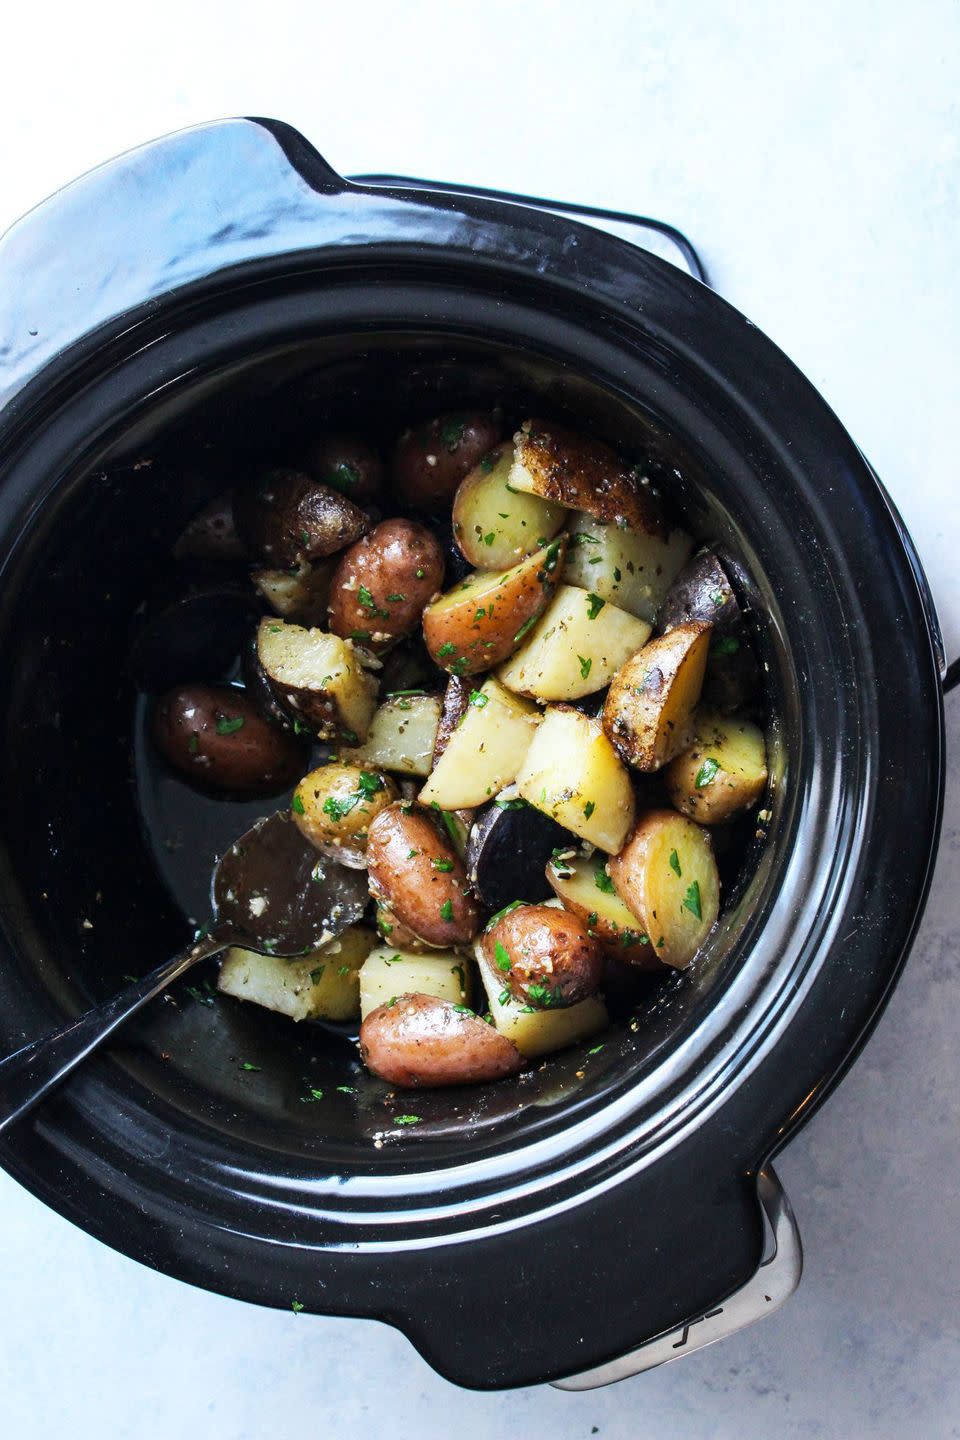 <p>Potatoes are a go-with-anything side dish. Make a big batch extra flavorful with this delicious buttery recipe.</p><p><strong>Get the recipe for <a href="https://cleanfoodiecravings.com/slow-cooker-garlic-herb-potatoes-2/" rel="nofollow noopener" target="_blank" data-ylk="slk:Slow Cooker Garlic Herb Potatoes" class="link ">Slow Cooker Garlic Herb Potatoes</a> at Clean Foodie Cravings.</strong> </p>